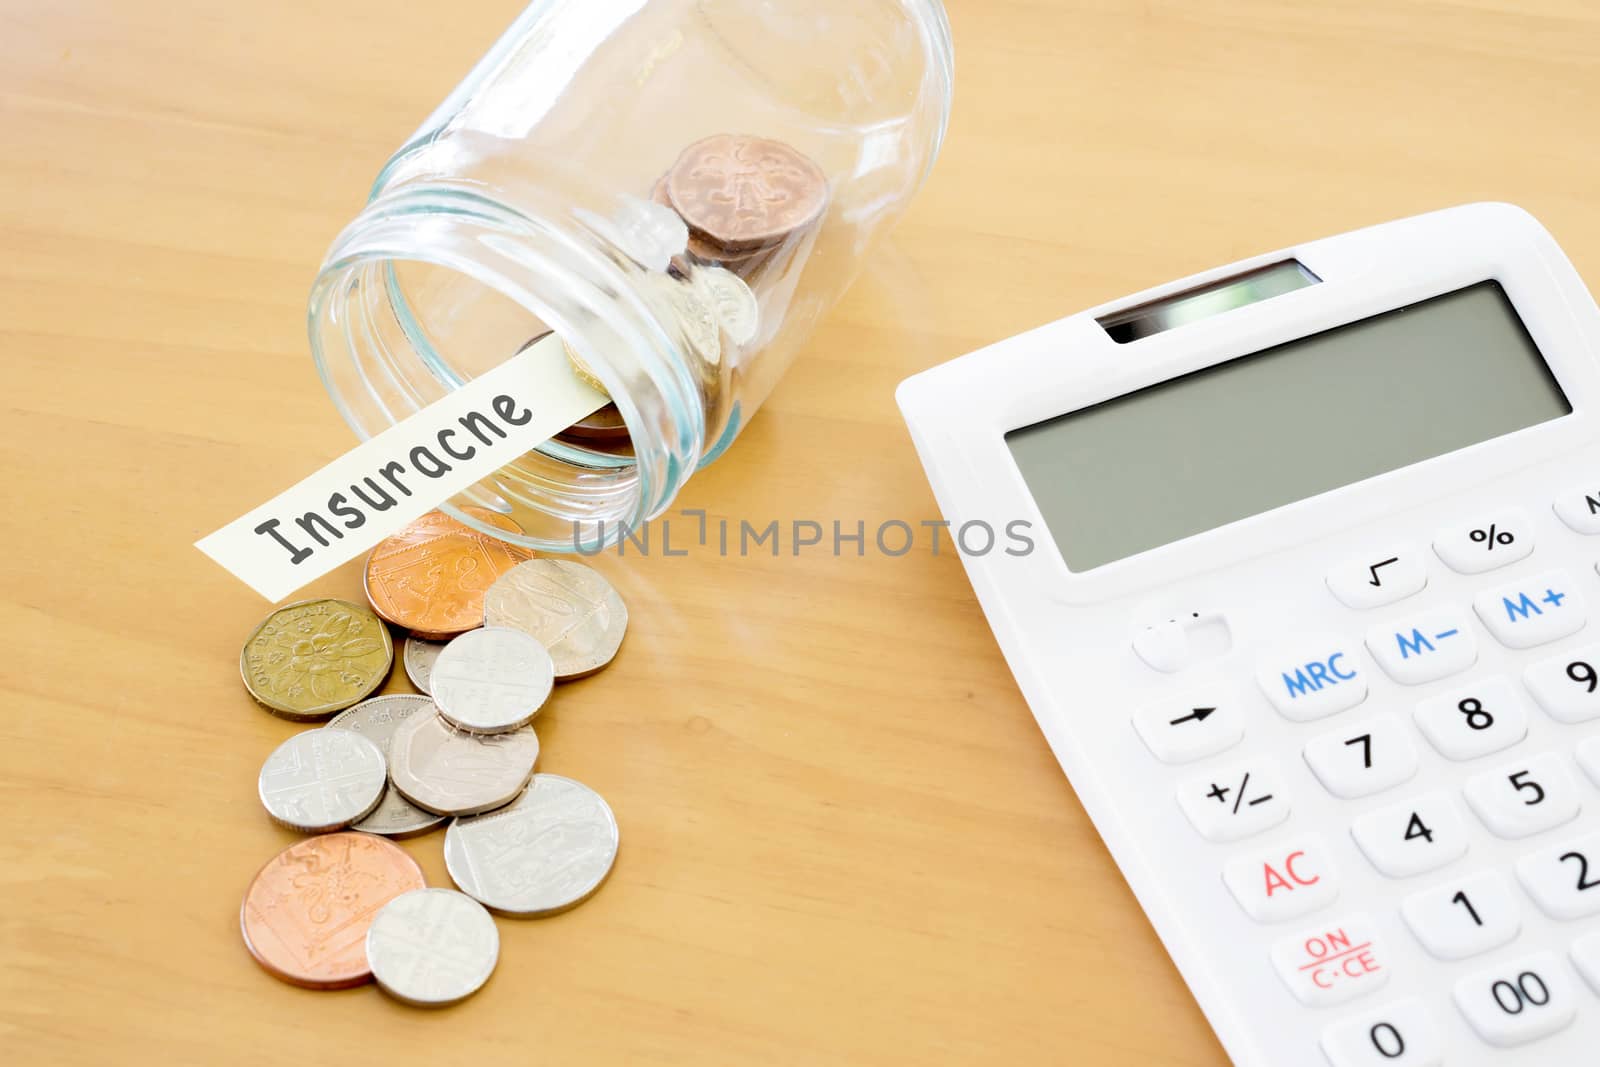  Sterling Finance - Stock image British Currency, Calculator, Co by ekachailo